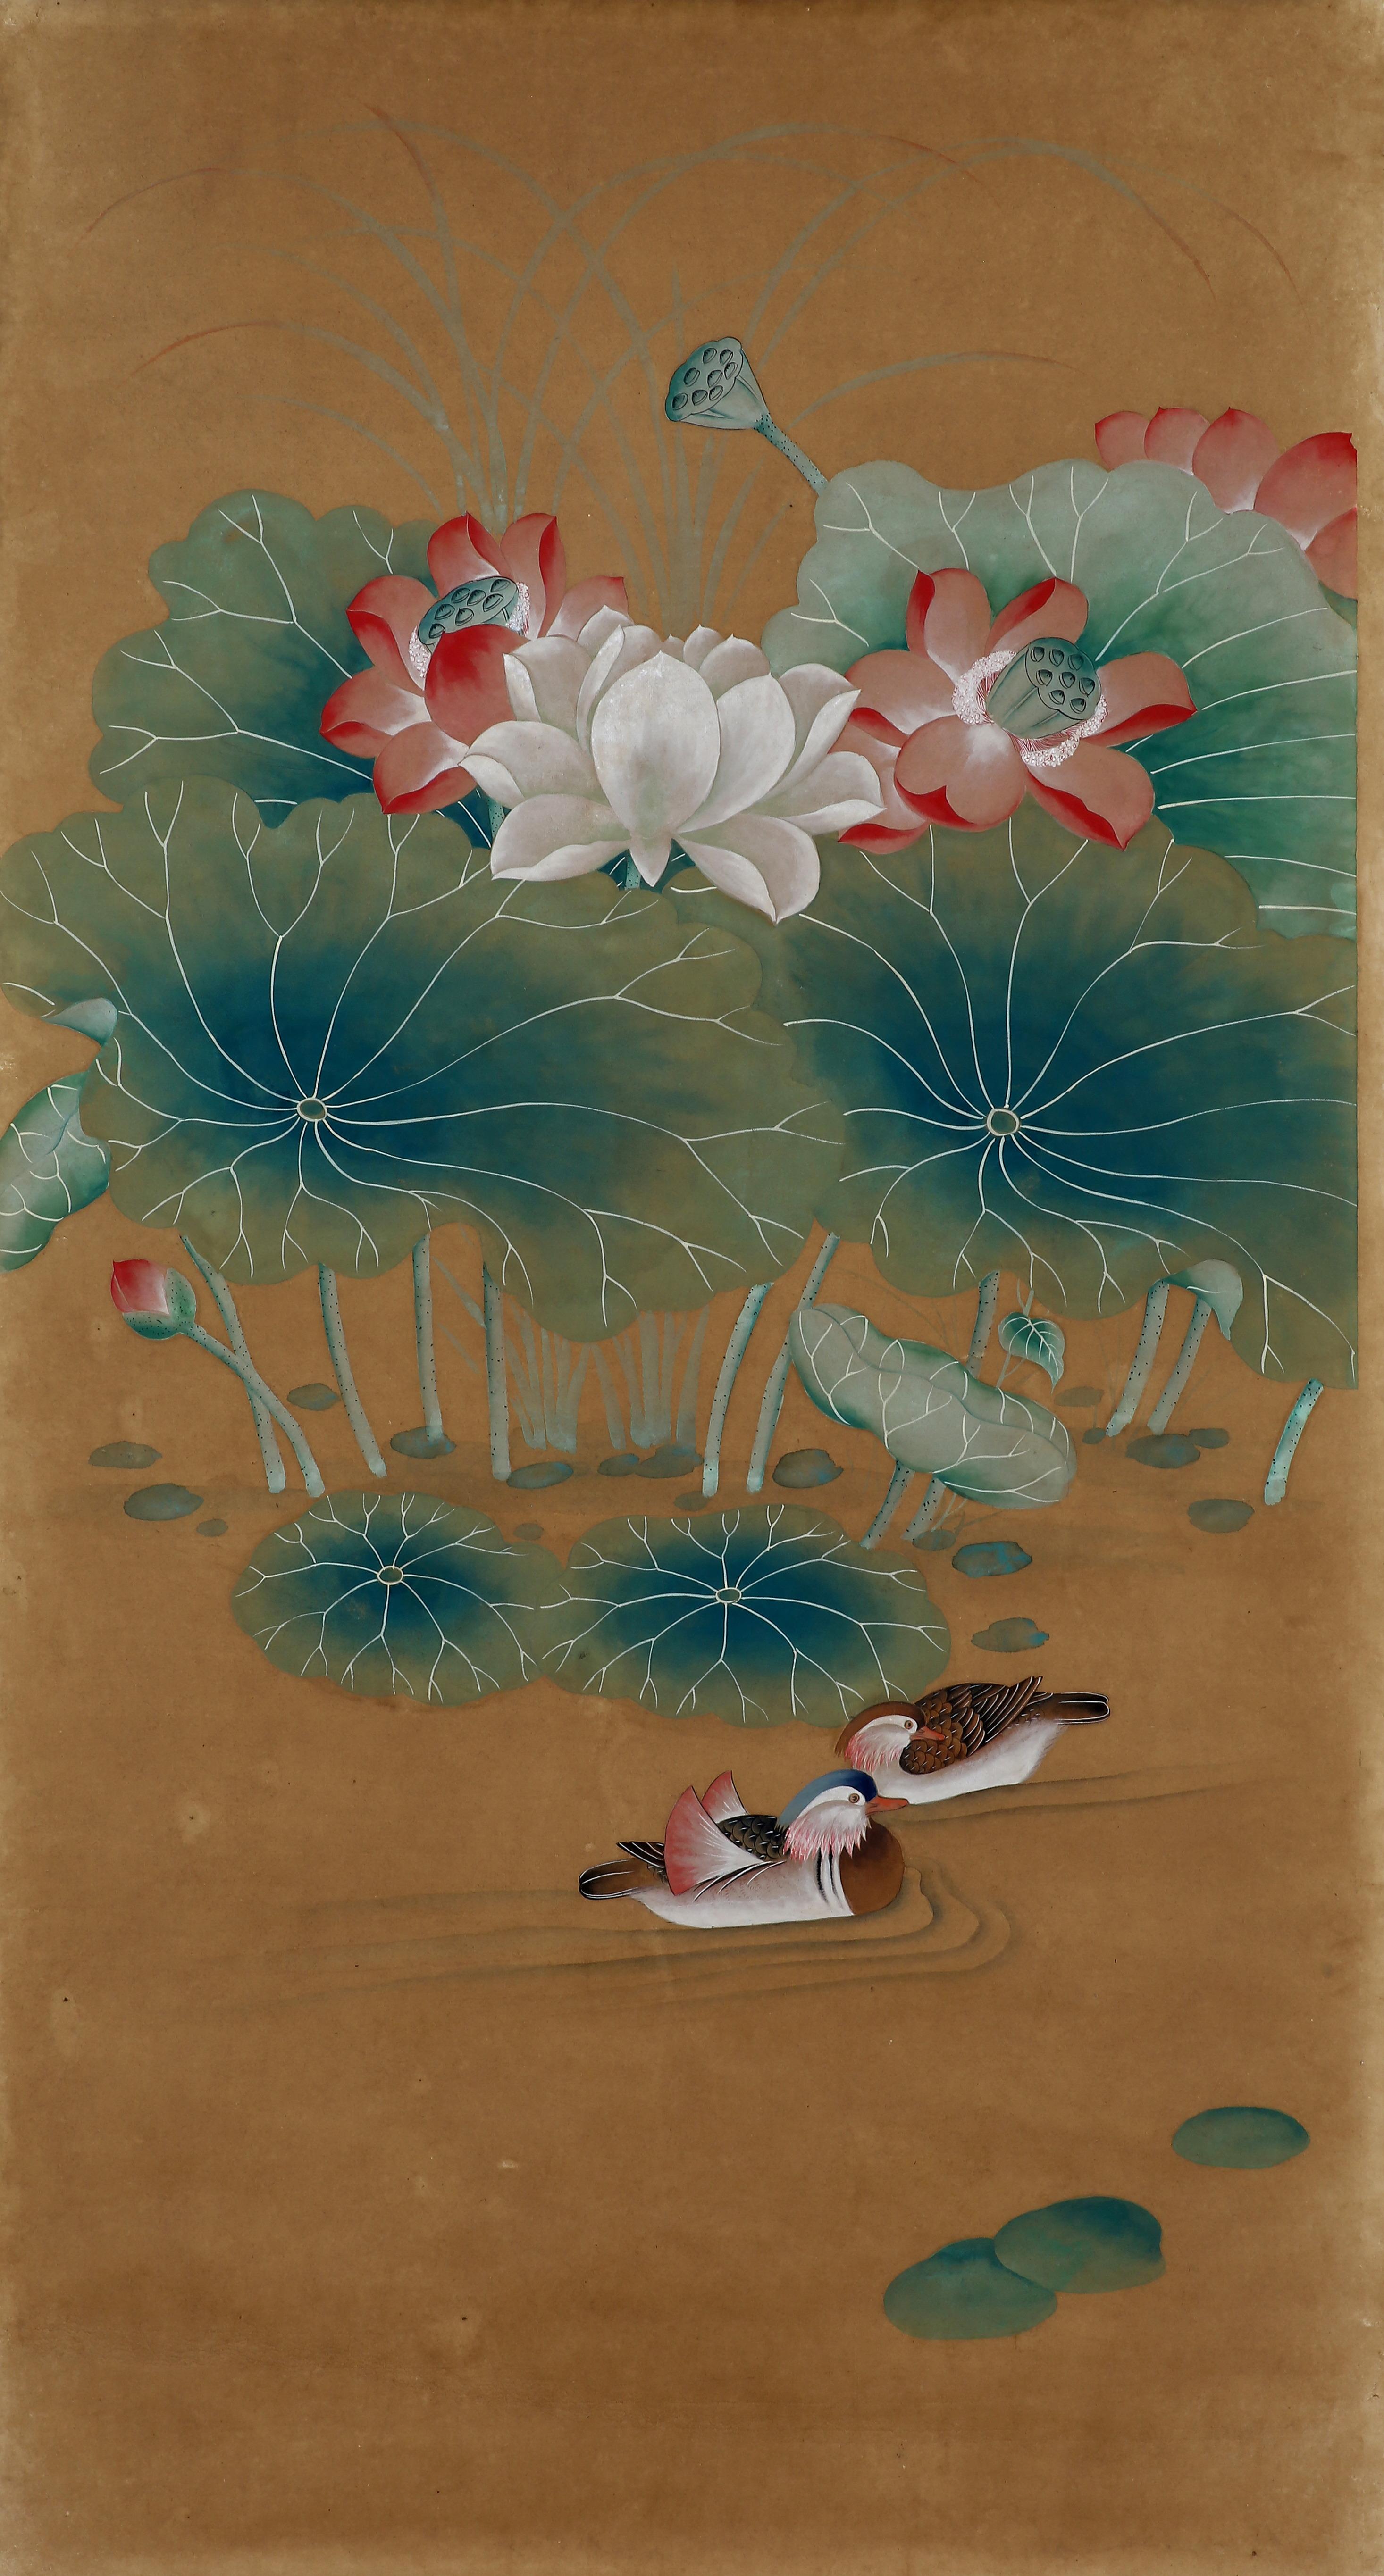 The fine pair of wallpaper panels hand-painted in watercolor on rice paper, reproducing the 19th-century Chinese export Chinoiserie paintings of lotus pond and mandarin ducks on export wallpaper, from our studio. An antiquing process is applied to